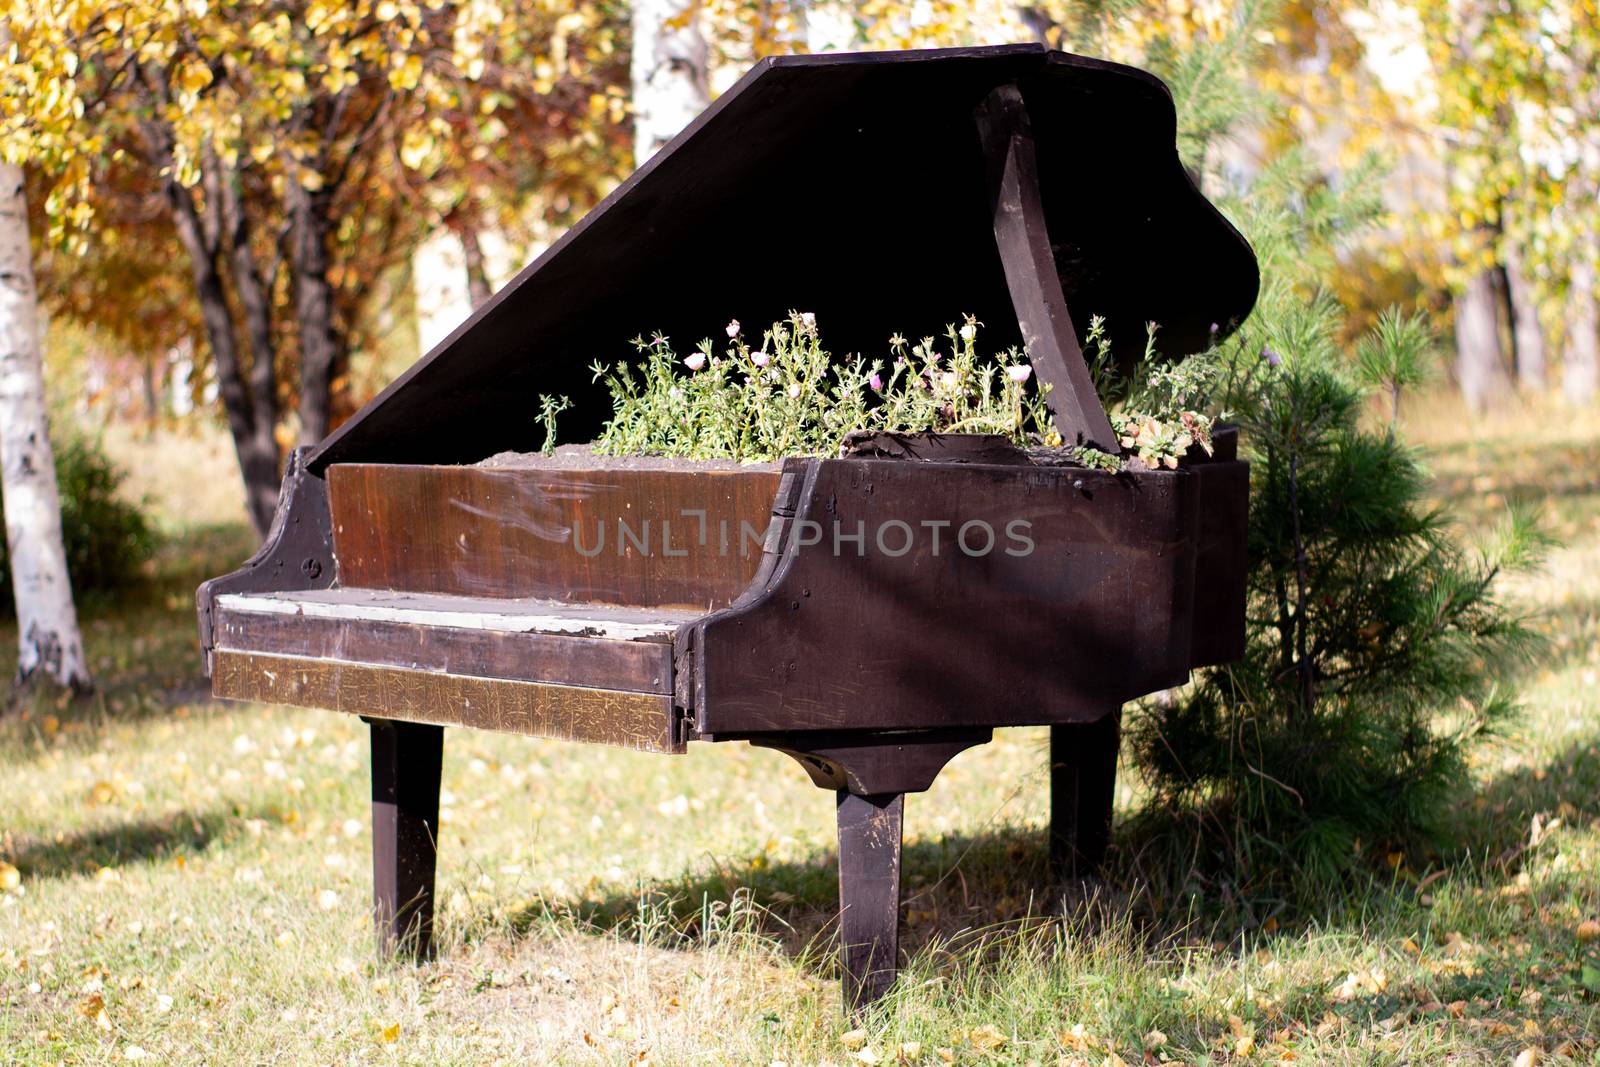 The bed for flowers equipped in an old black piano in the city park. Petunia flowers in an unusual creative bed by AnatoliiFoto